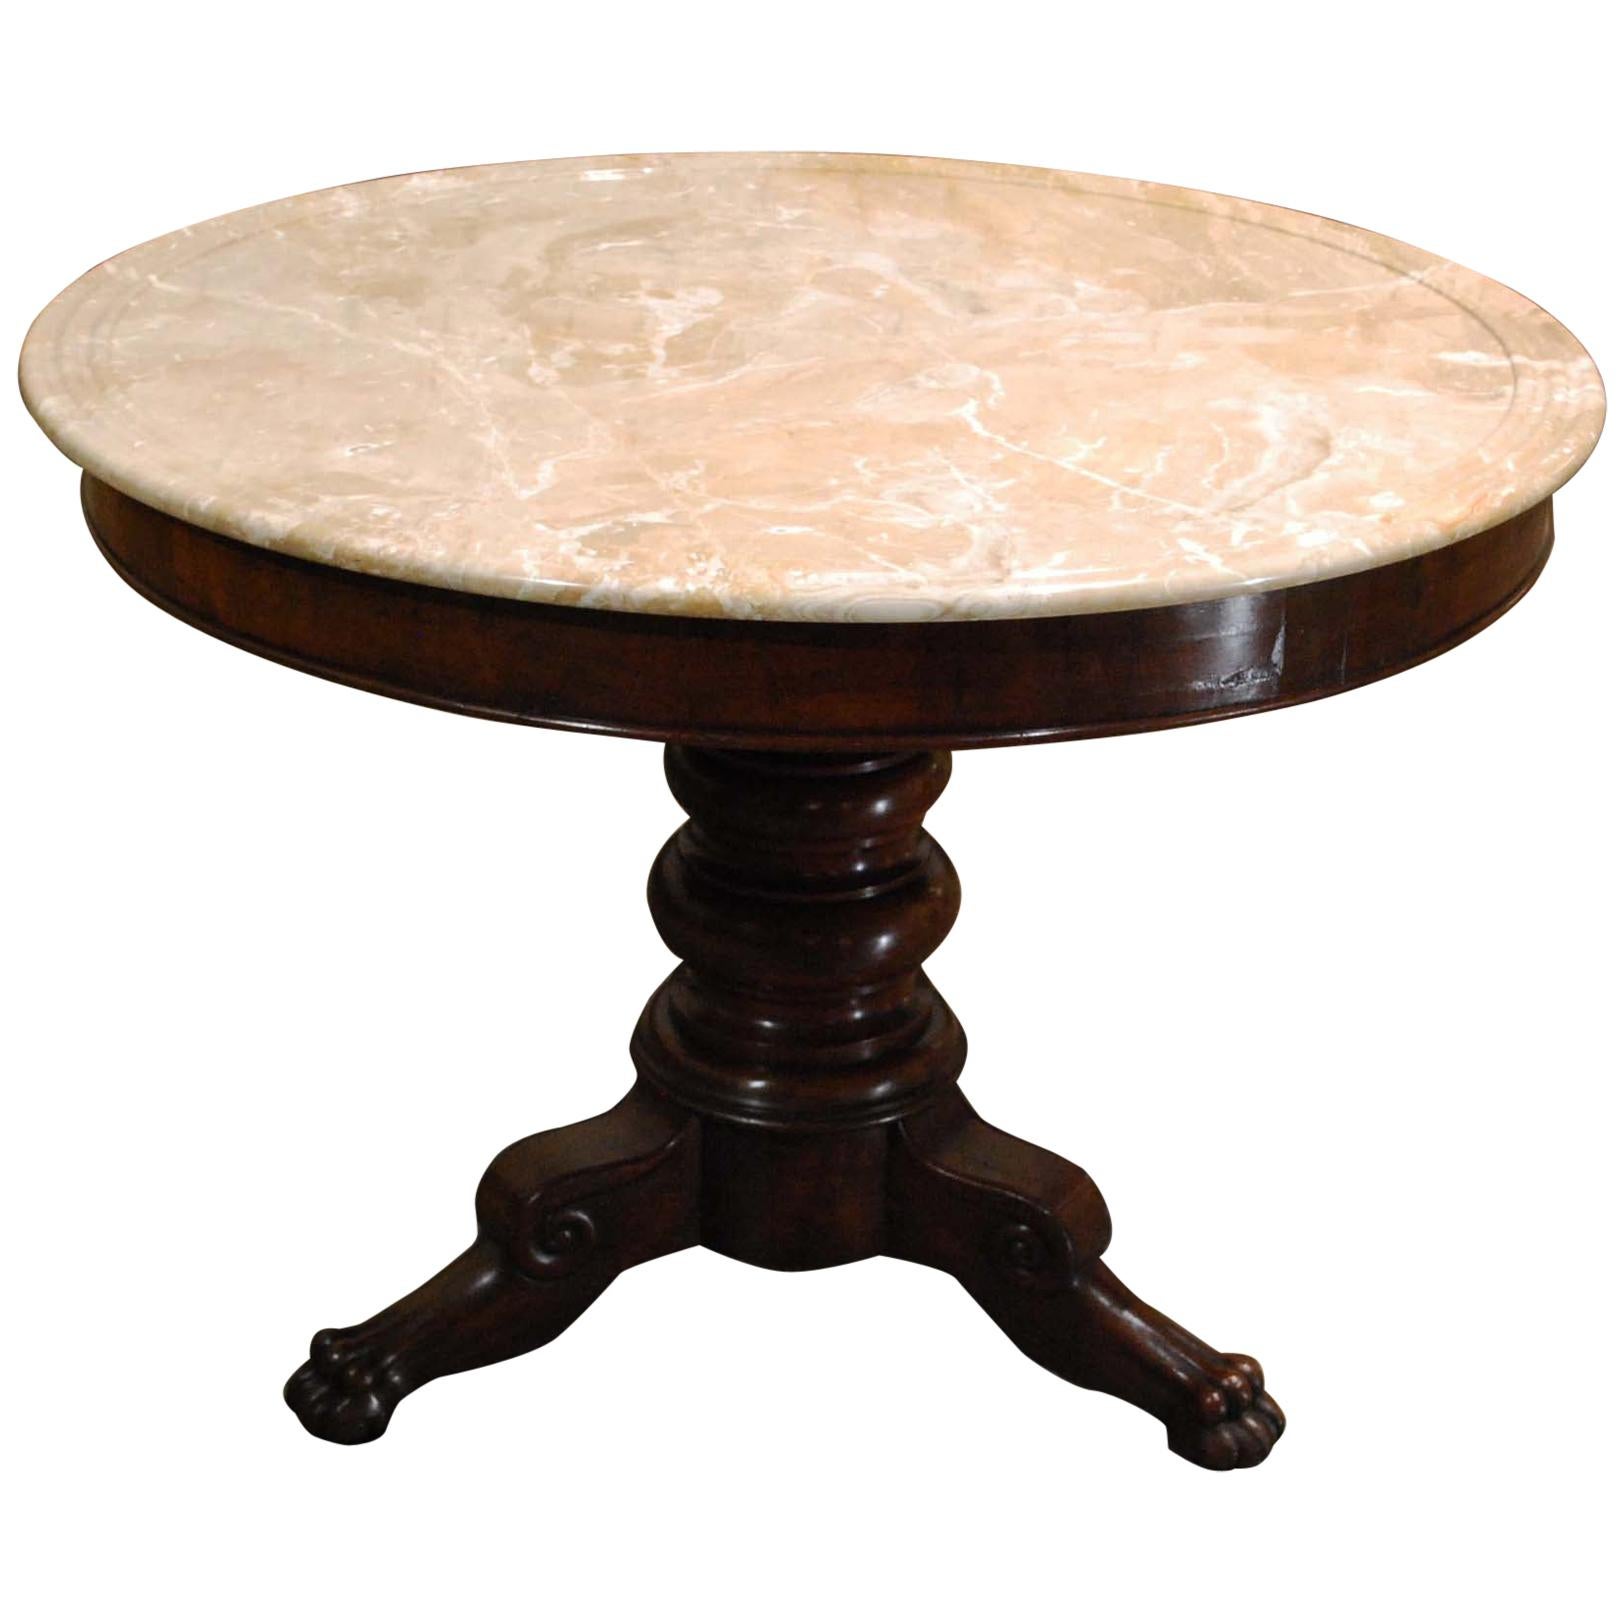 Antique 19th Century Empire Round Mahogany Table with Marble Top